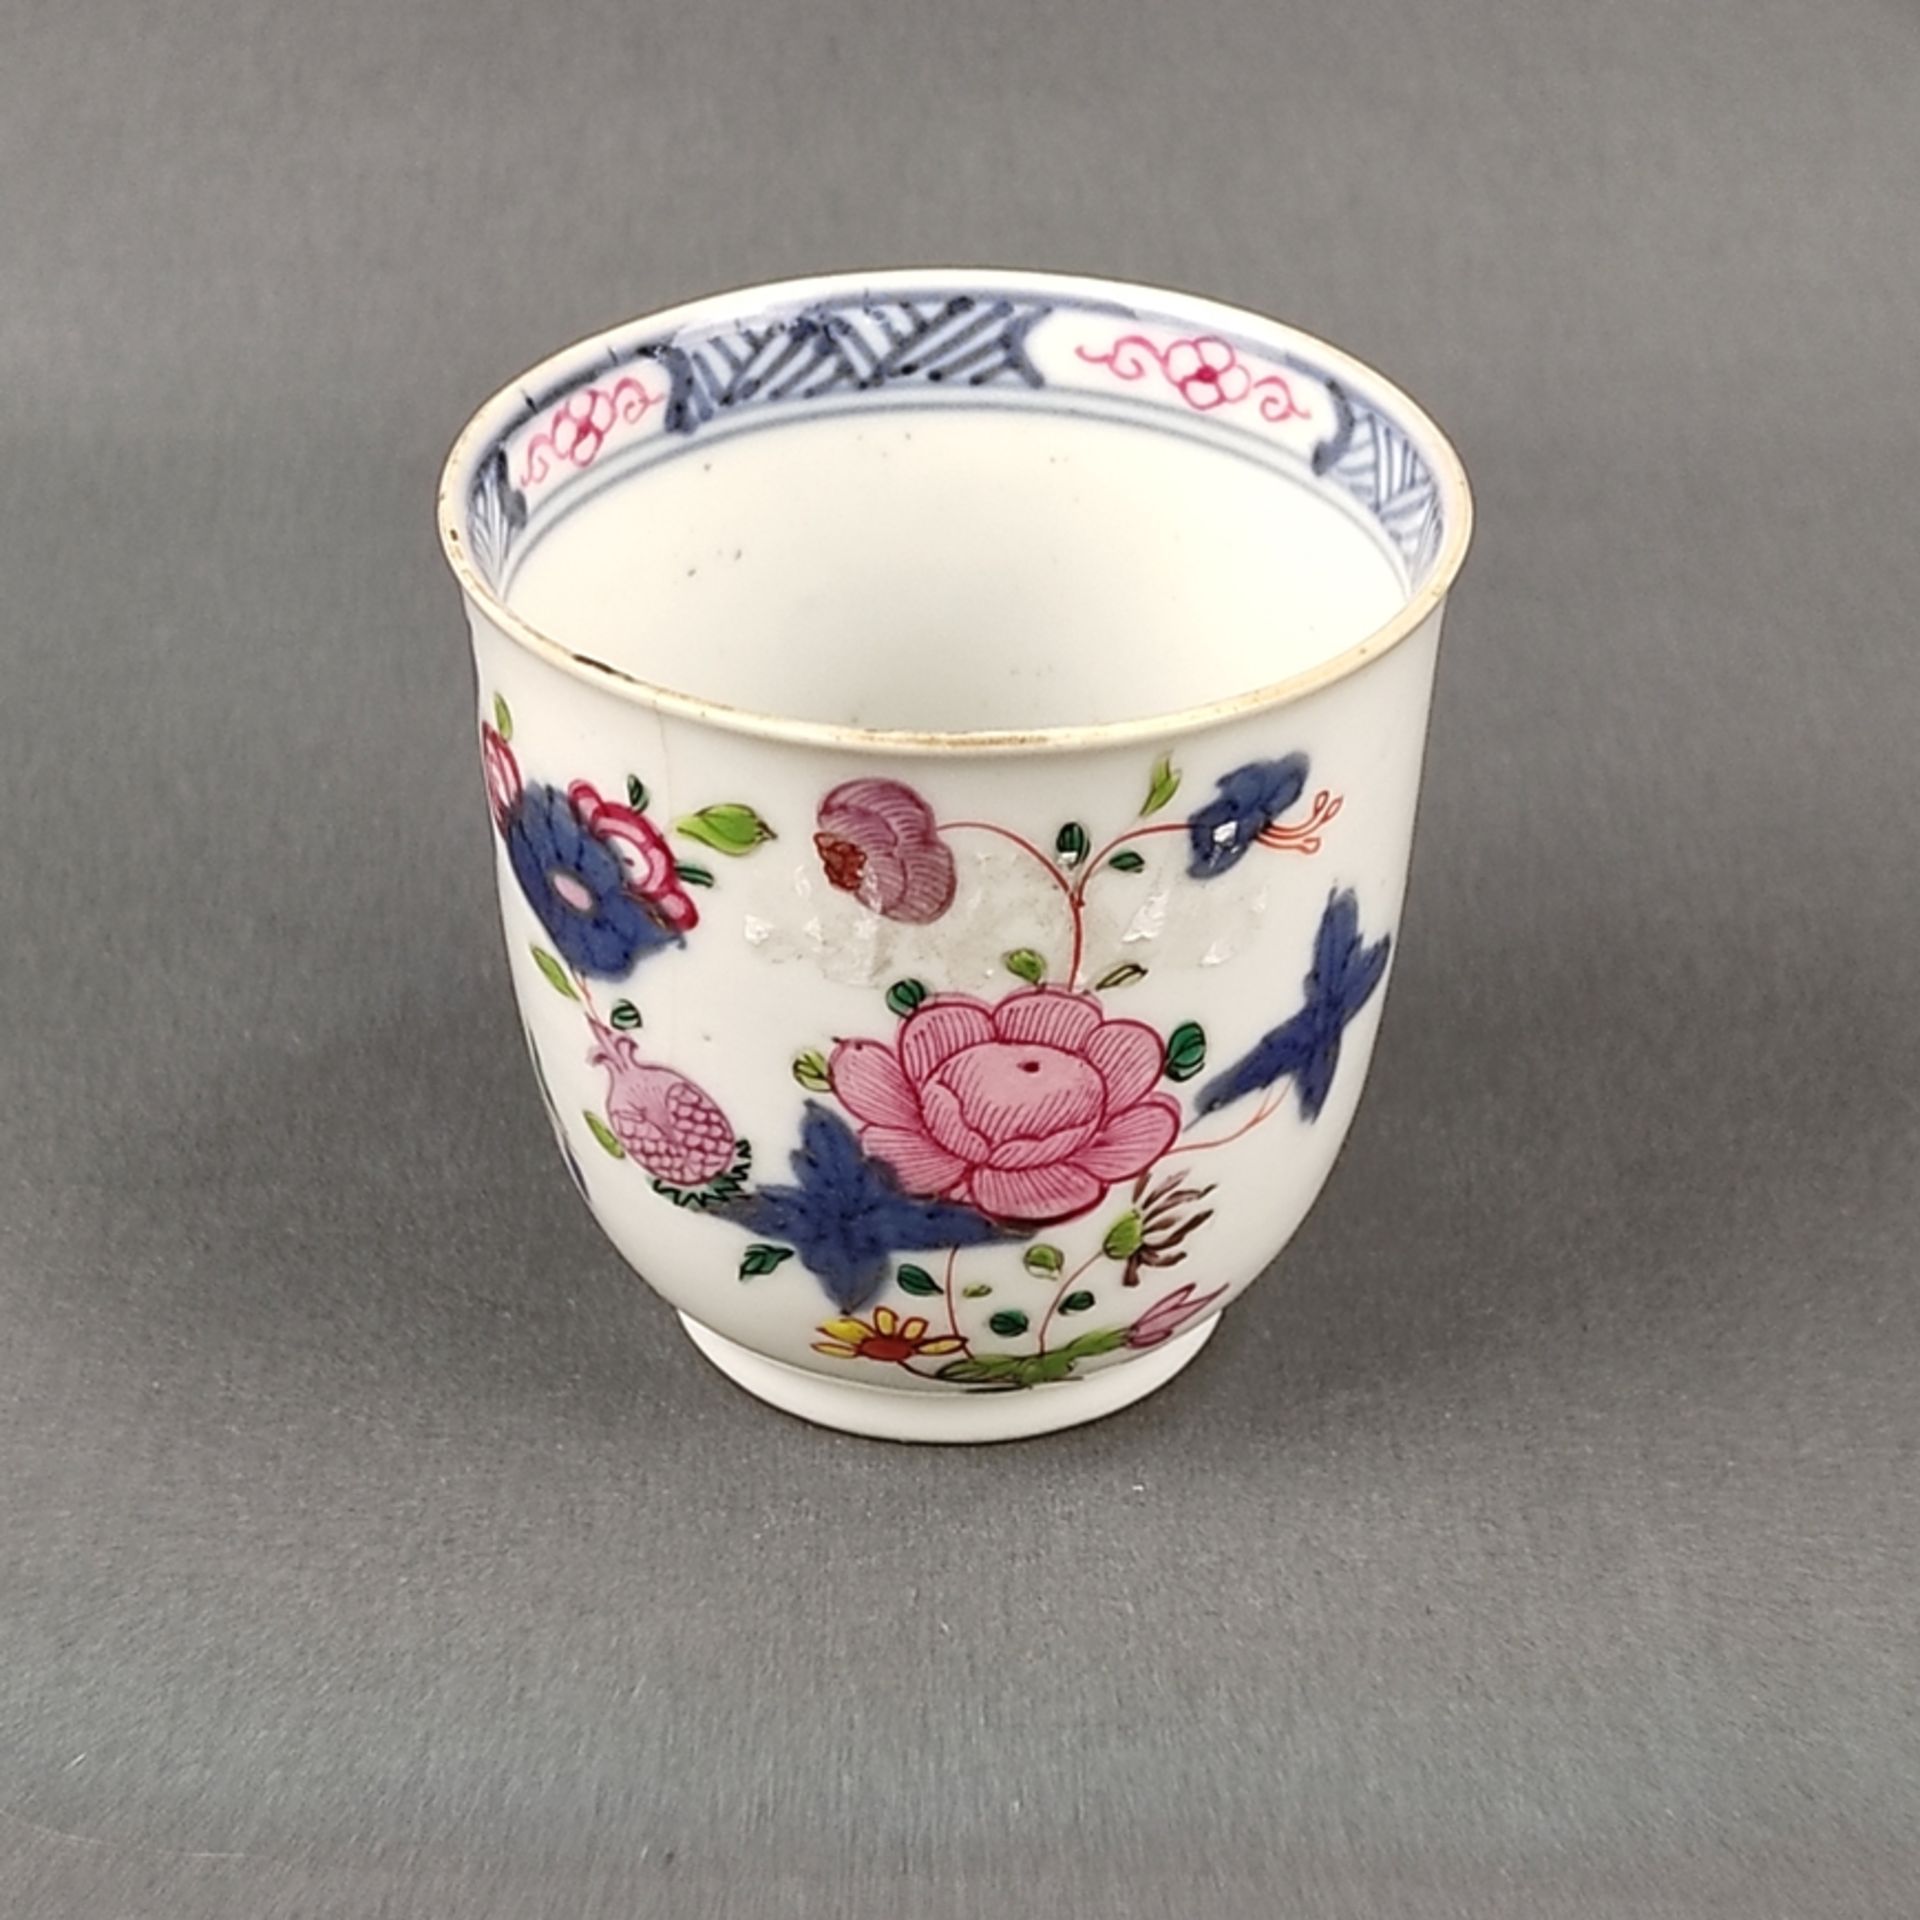 Cup, famille rose, China circa 1900, porcelain cup with polychrome floral decoration, gilding resid